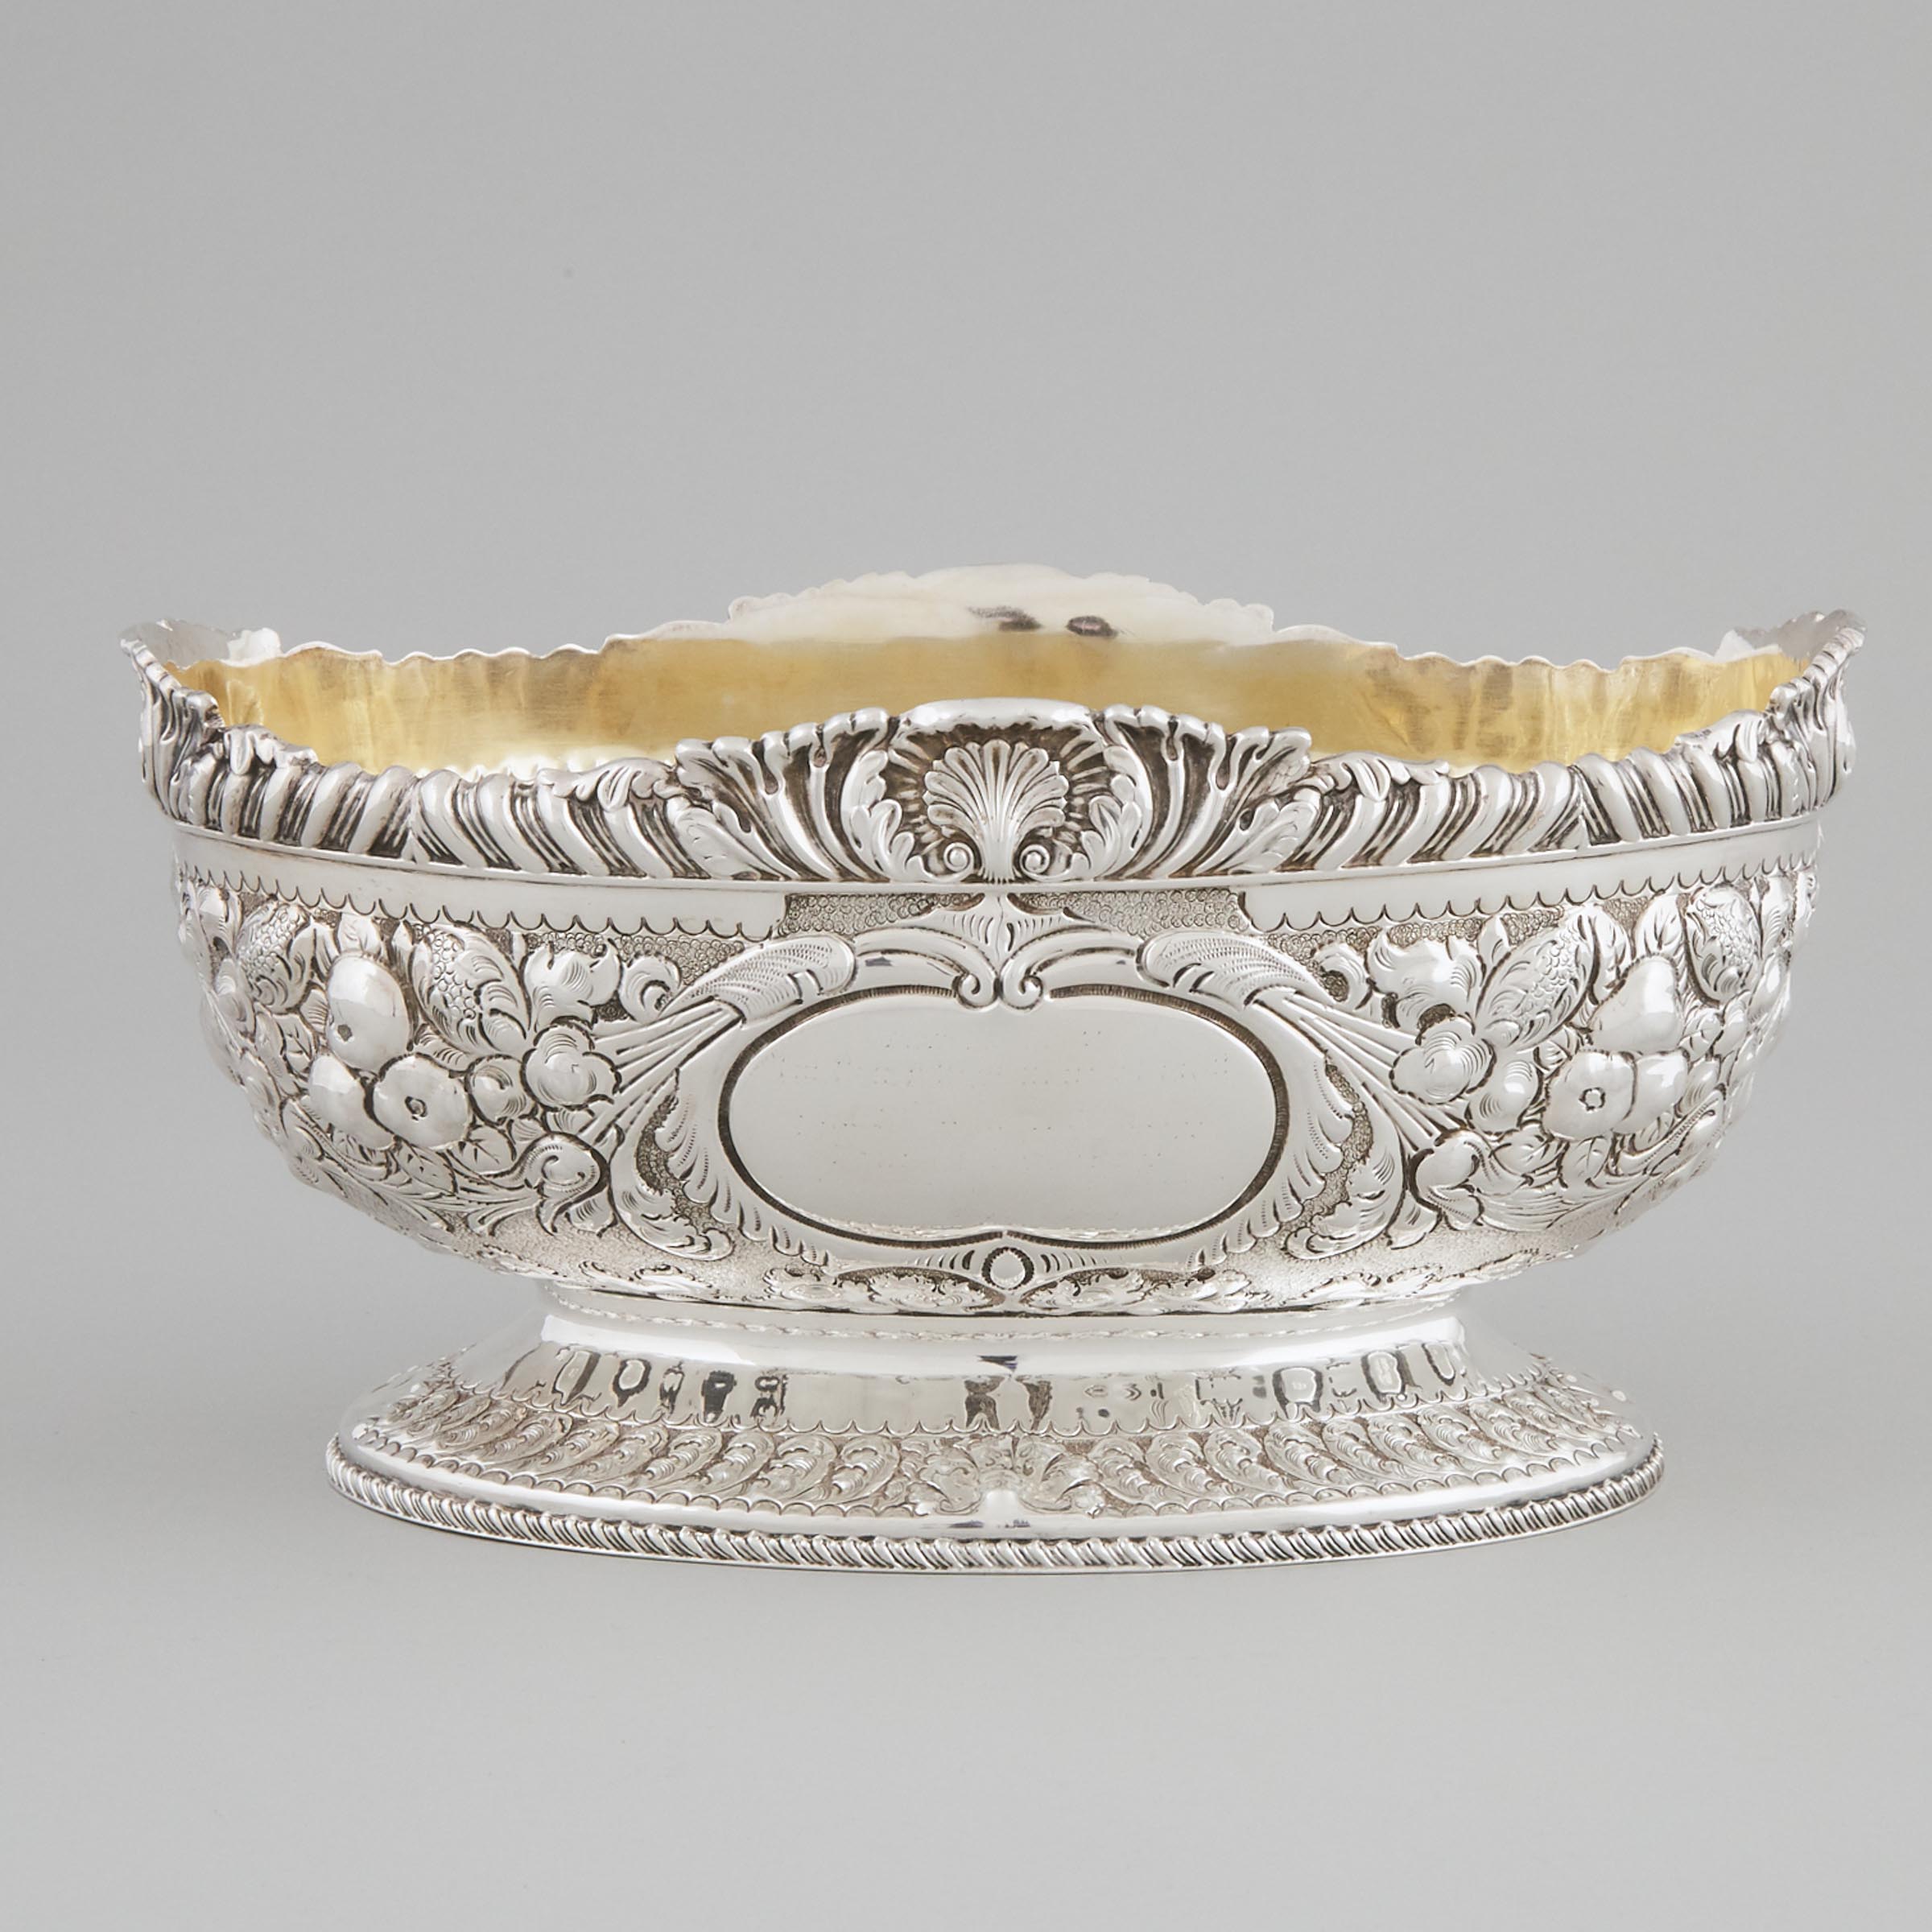 Victorian Silver Repoussé Oval Footed Bowl, Atkin Bros., Sheffield, 1891